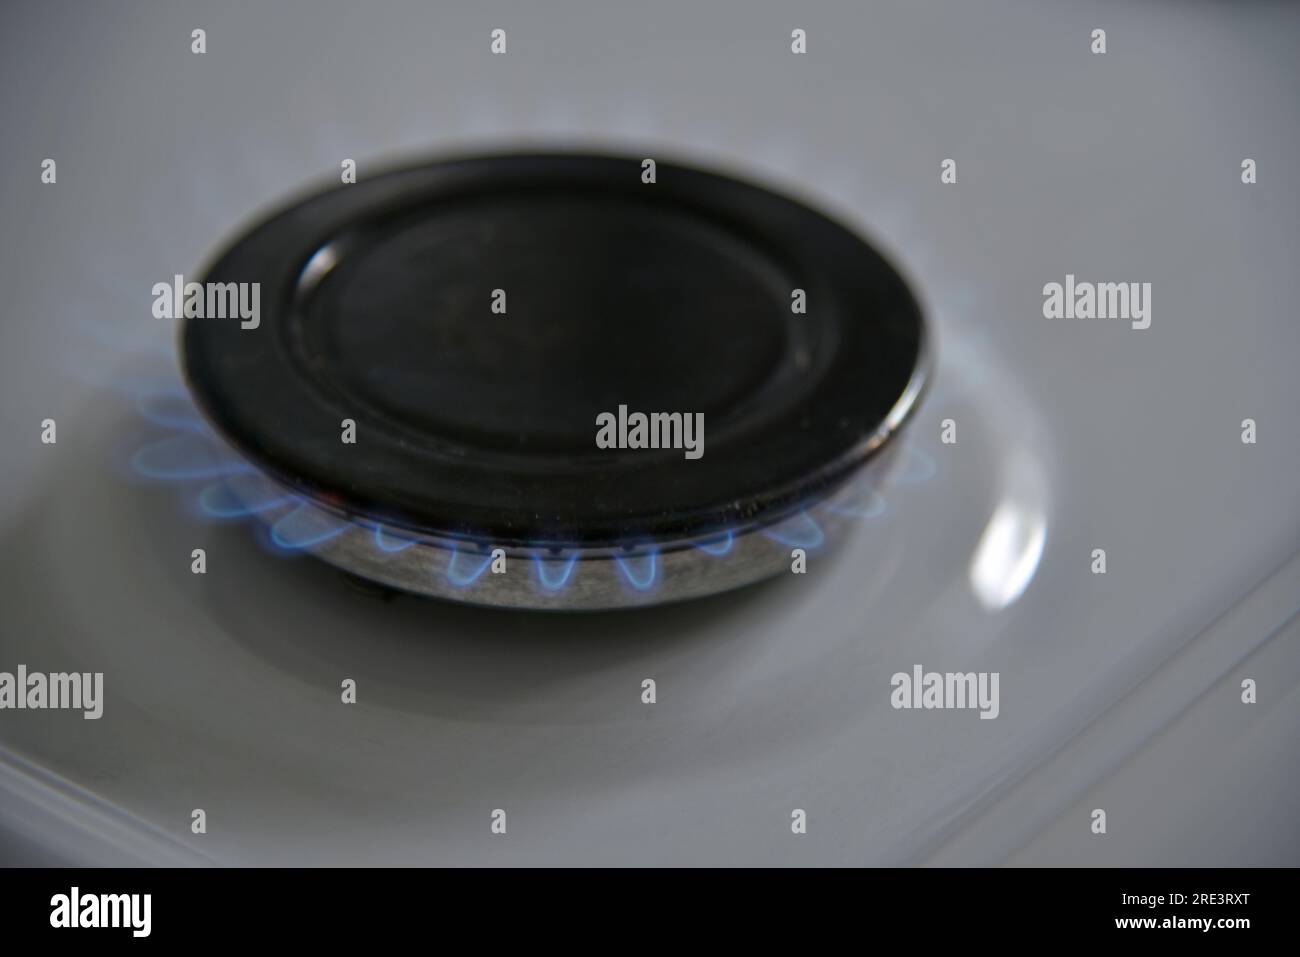 A burning gas burner on the kitchen stove. Design element. Fire flame. Stock Photo